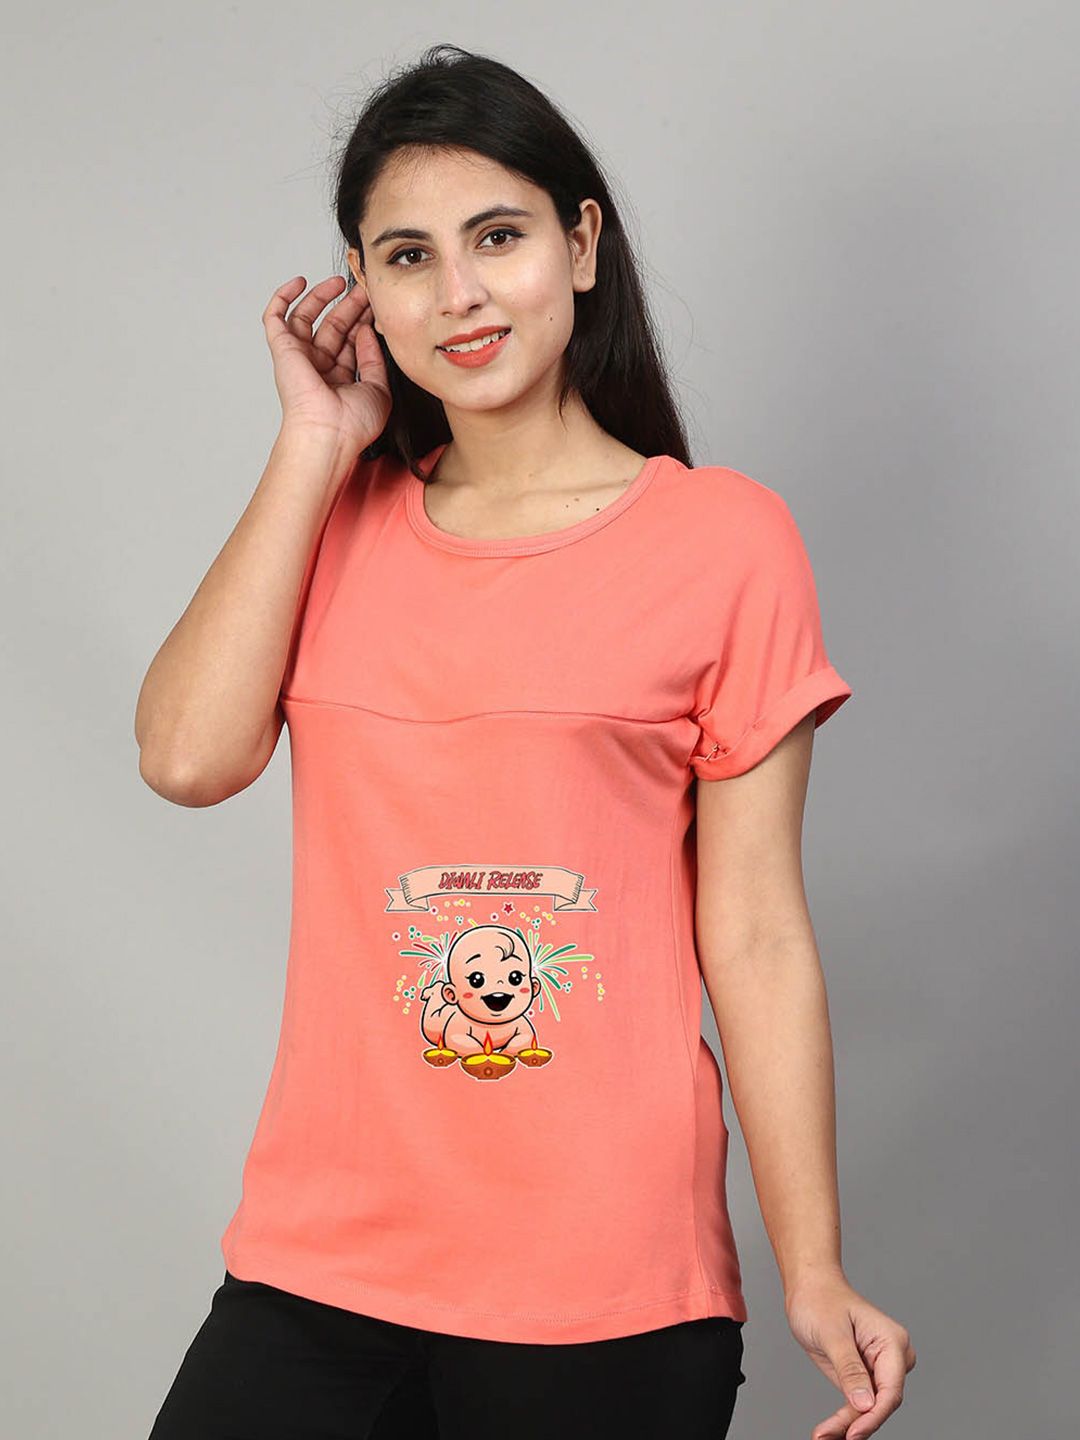 SillyBoom Graphic Printed Short Sleeves Maternity T-shirt Price in India